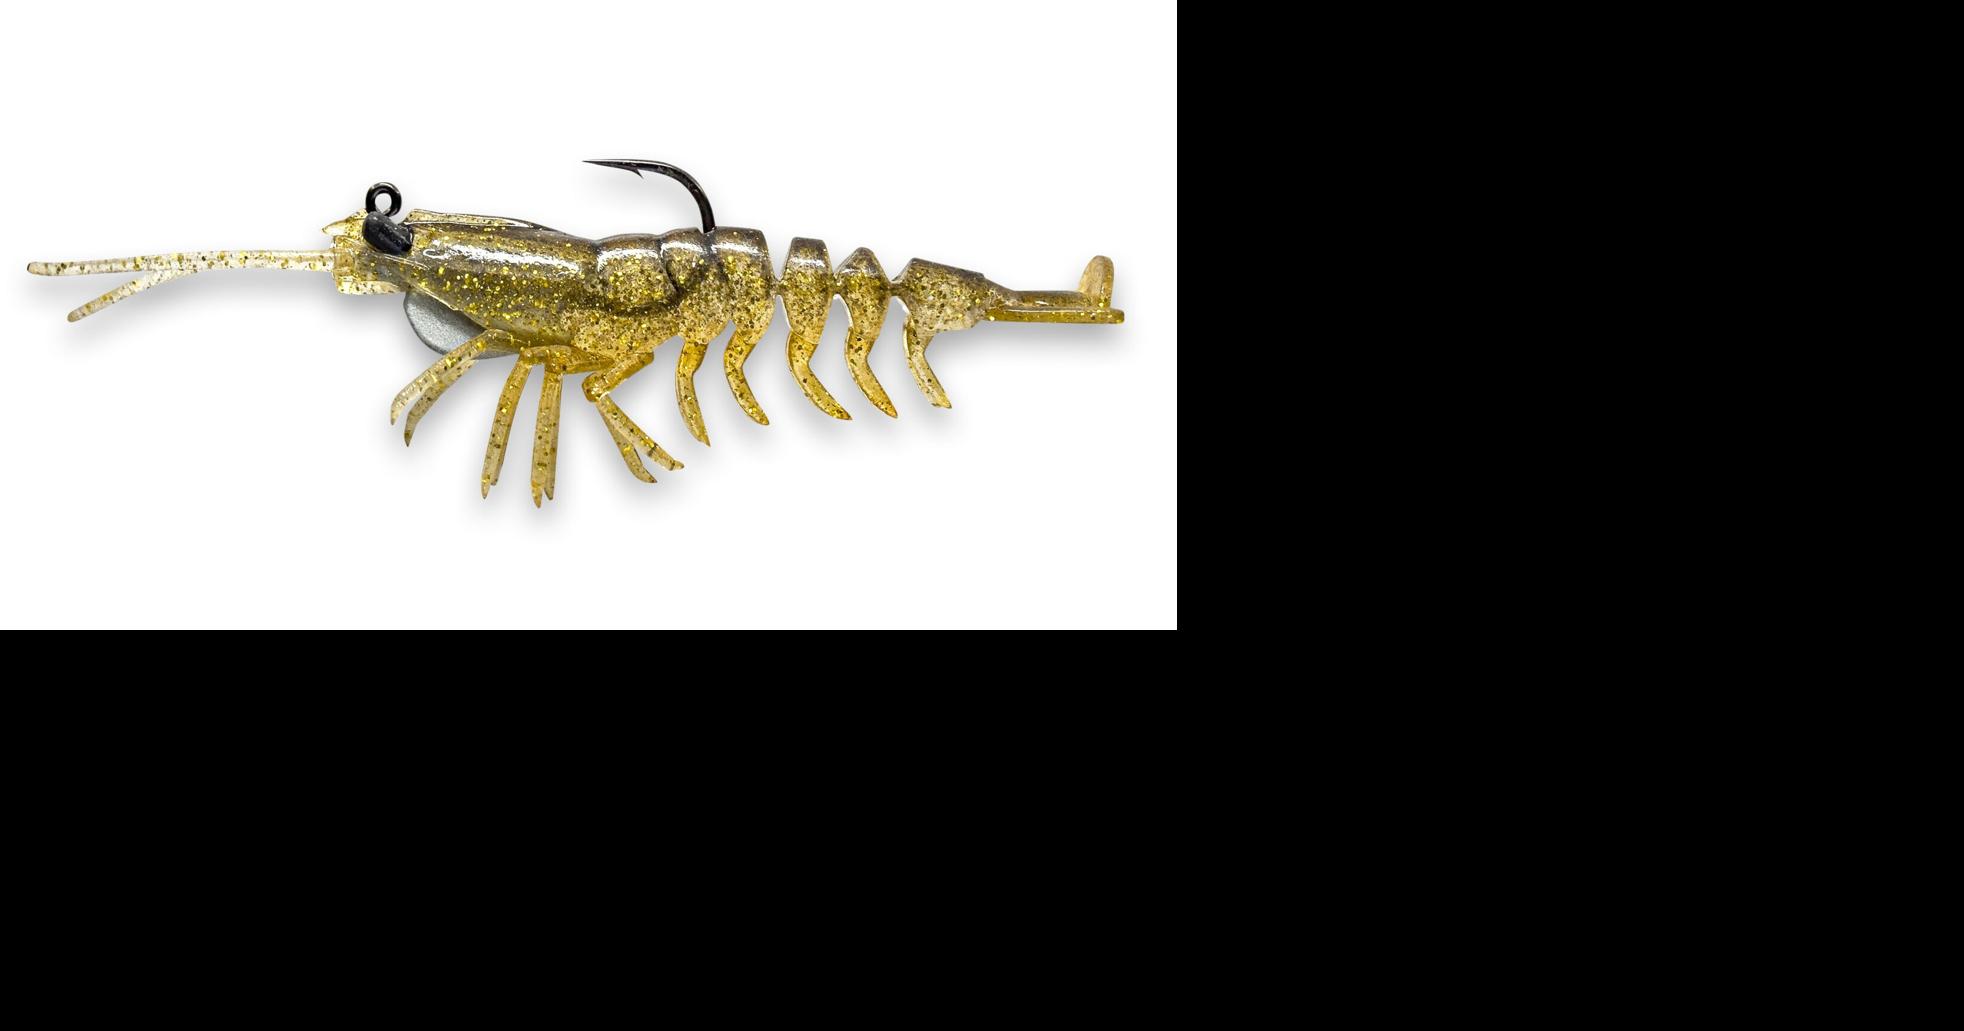 NEW Savage Gear Manic Shrimp V2 Delivers Lifelike Movement, Press Releases